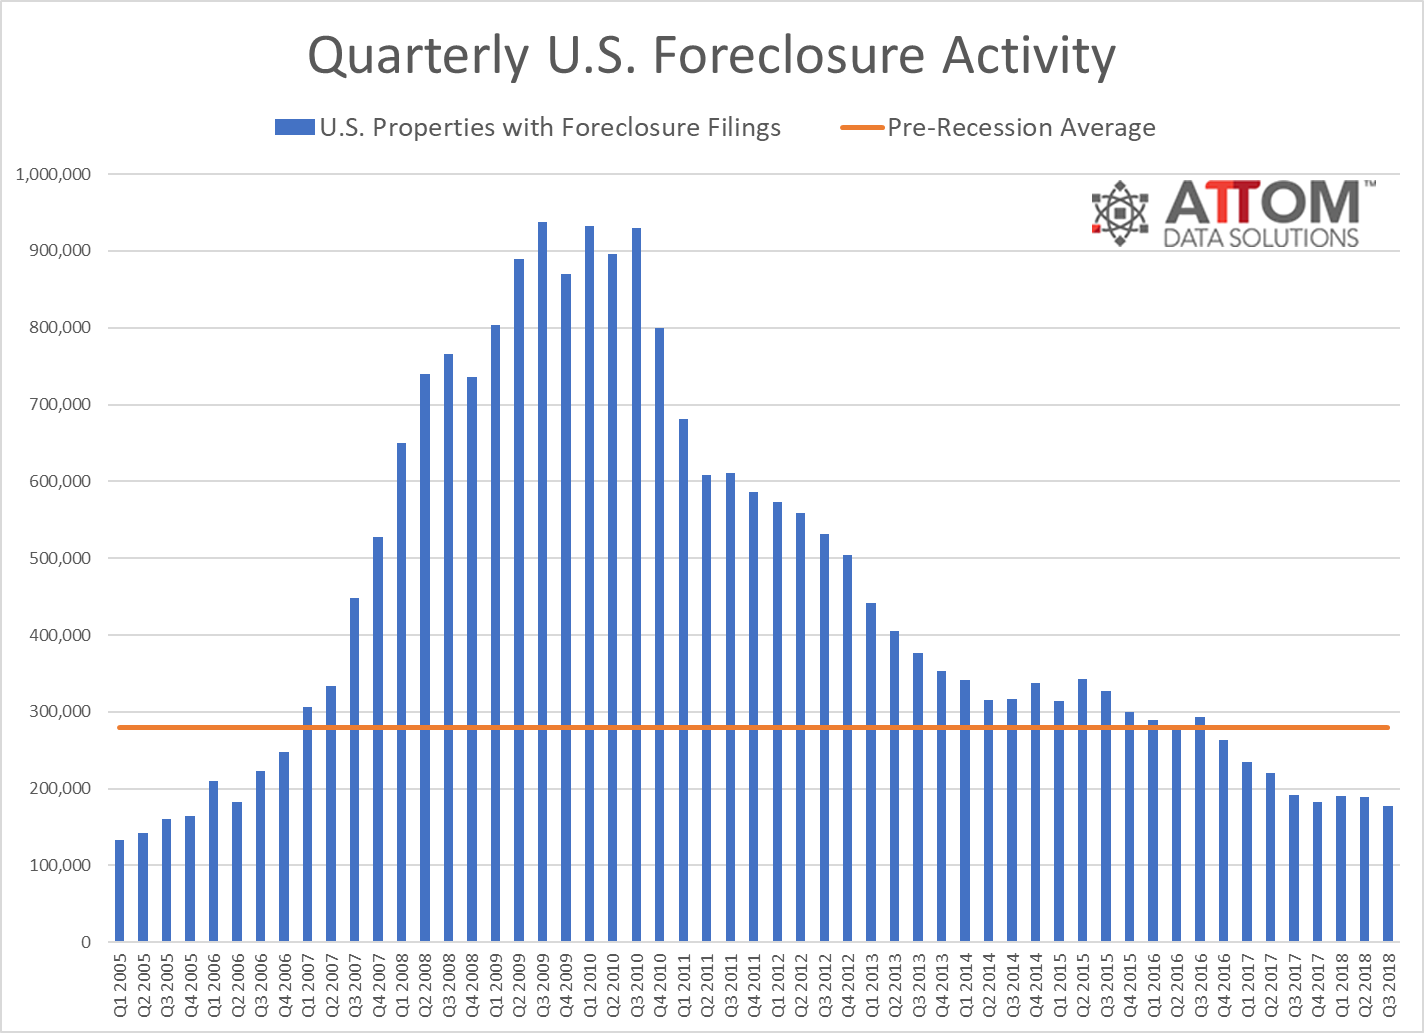 A total of 177,146 properties carried foreclosure filings in the third quarter, down six percent from the previous quarter and down eight percent from a year ago to the lowest level since the fourth quarter of 2005